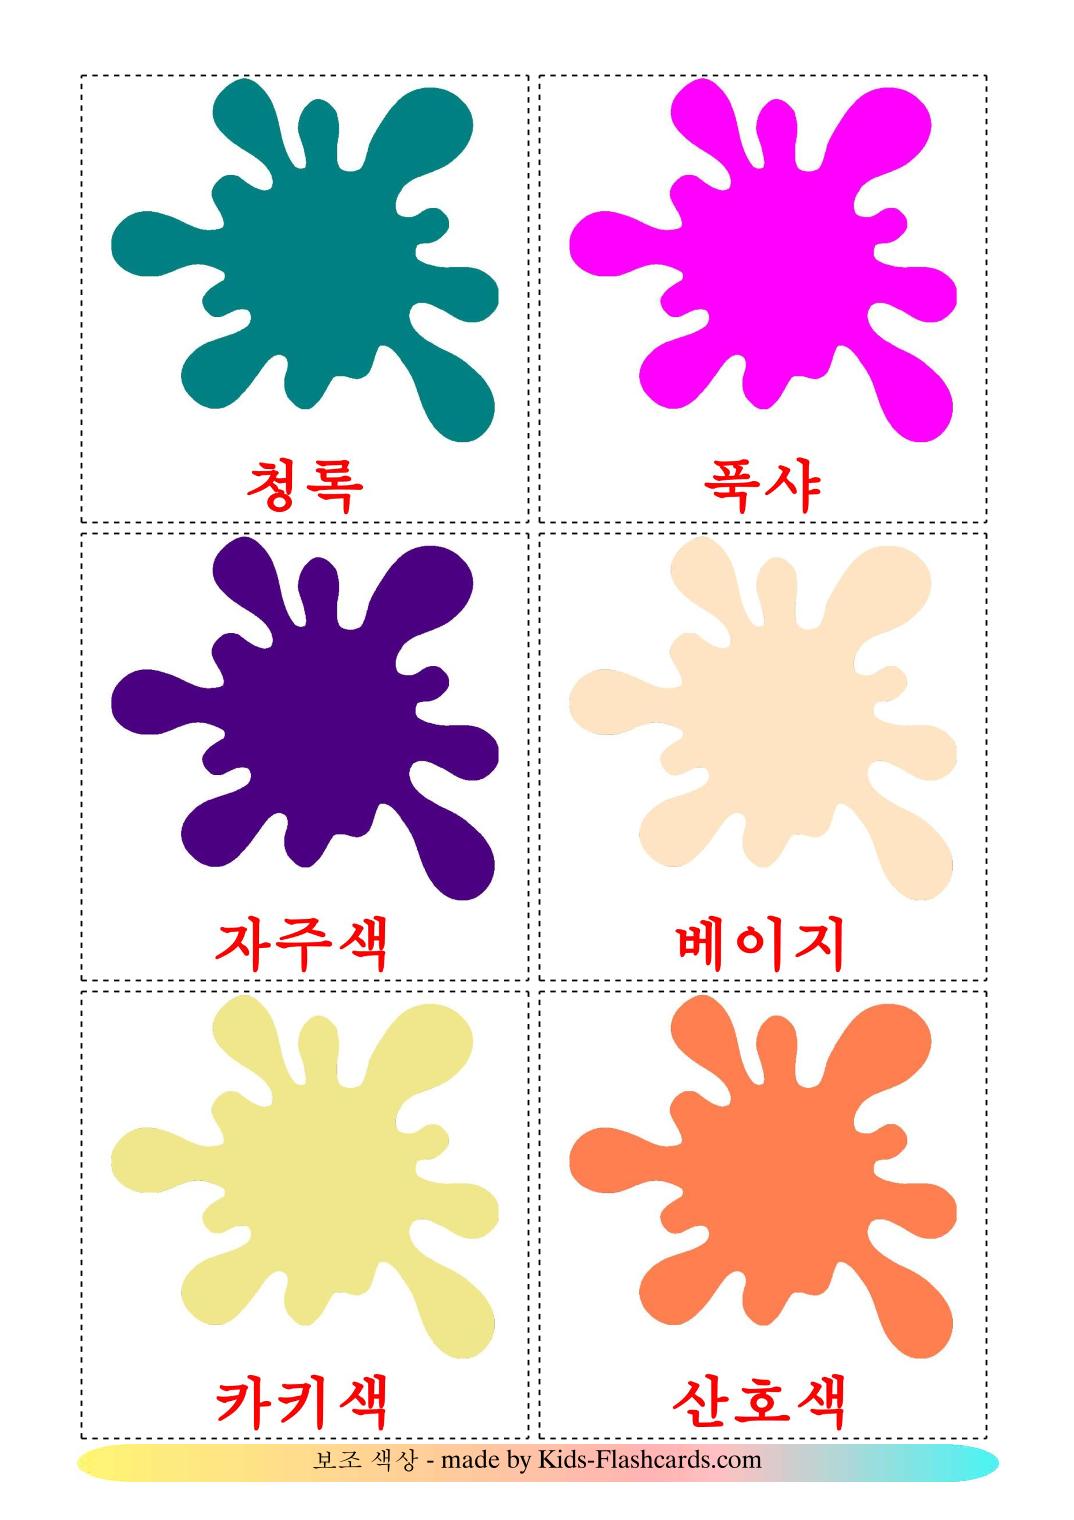 Secondary colors - 20 Free Printable korean Flashcards 